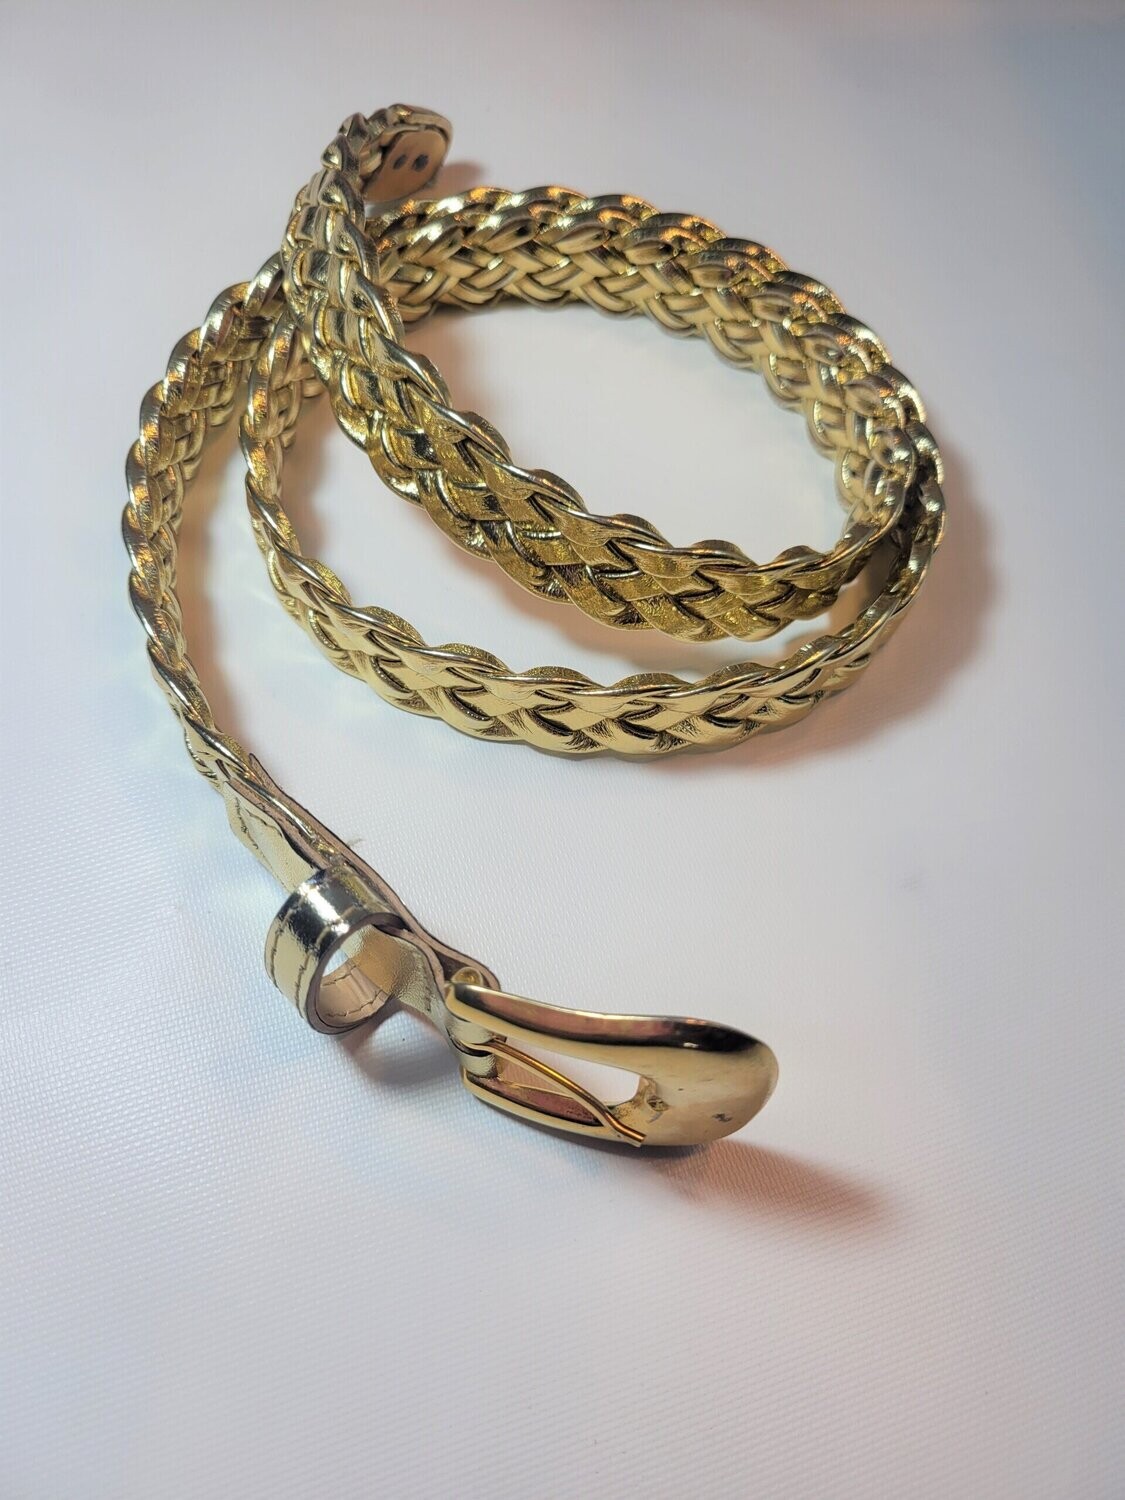 Gold Braided Belt Bling Style for Dress Gown or Jeans